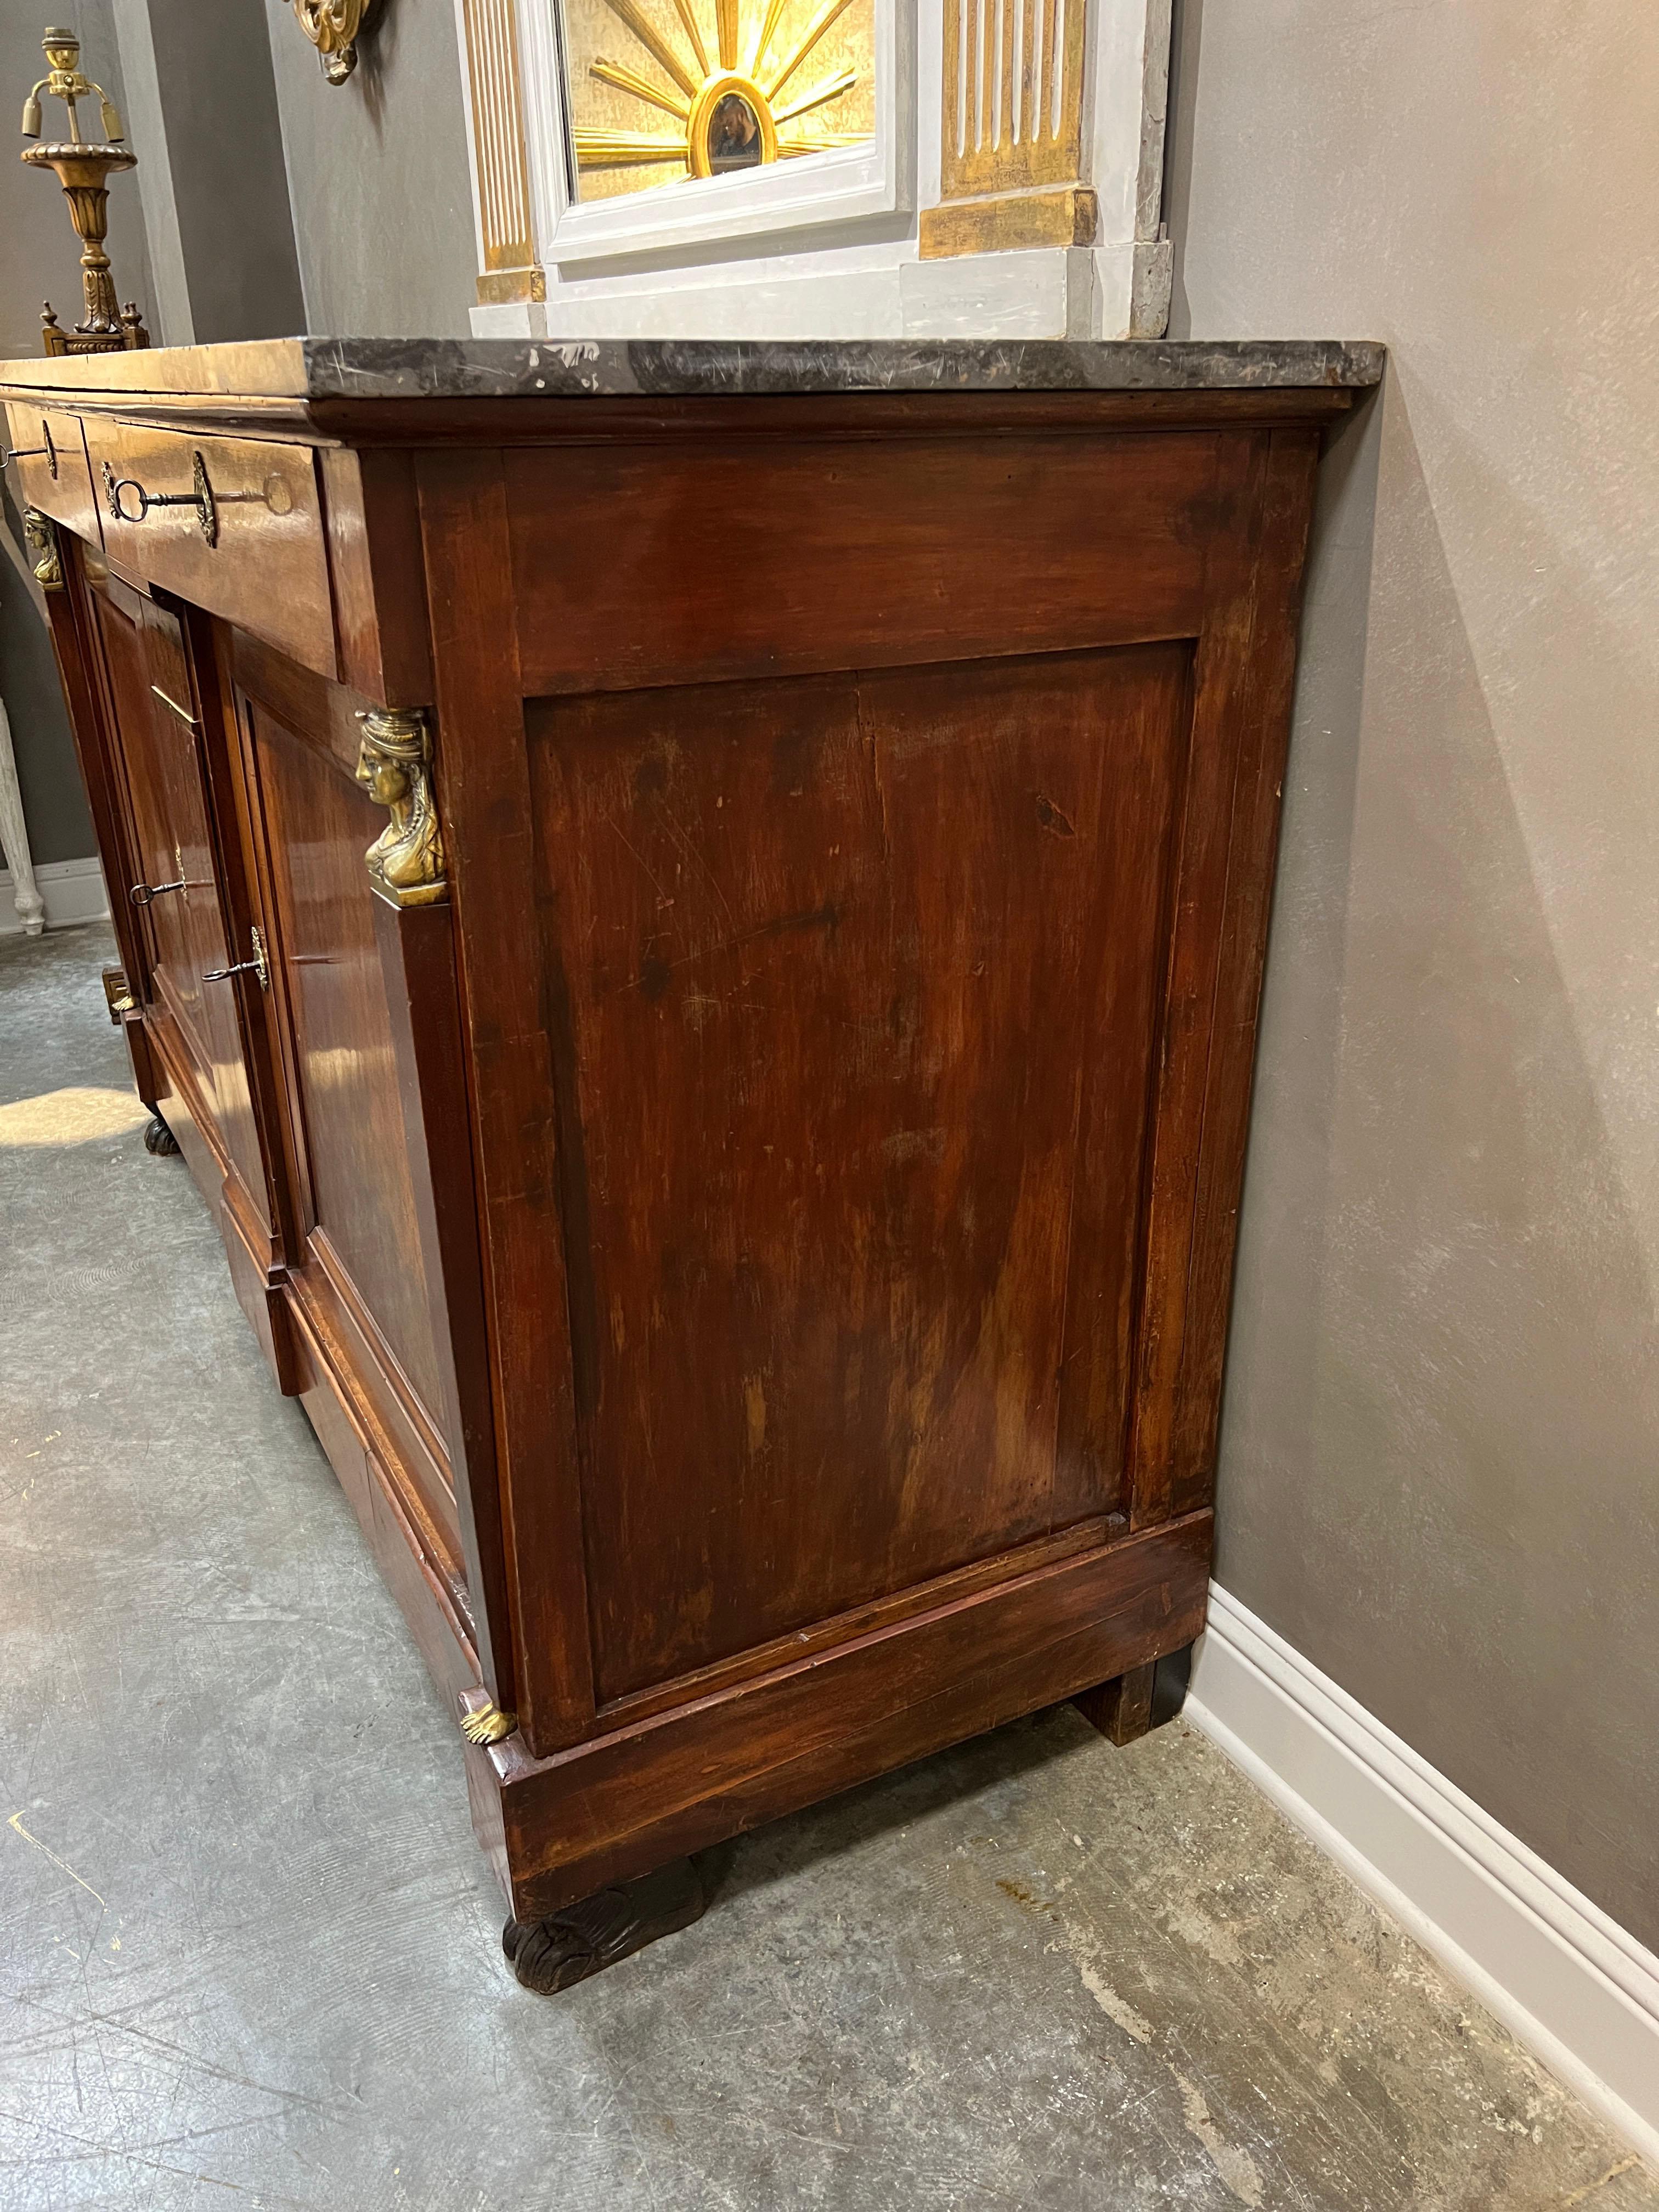 Impressive grande Empire style two door buffet in mahogany with original marble top. The cabinet is accented with brass key escutcheons and with a caryatided bust and feet at top and bottom of side columns. Top drawers in pine lined with green felt.